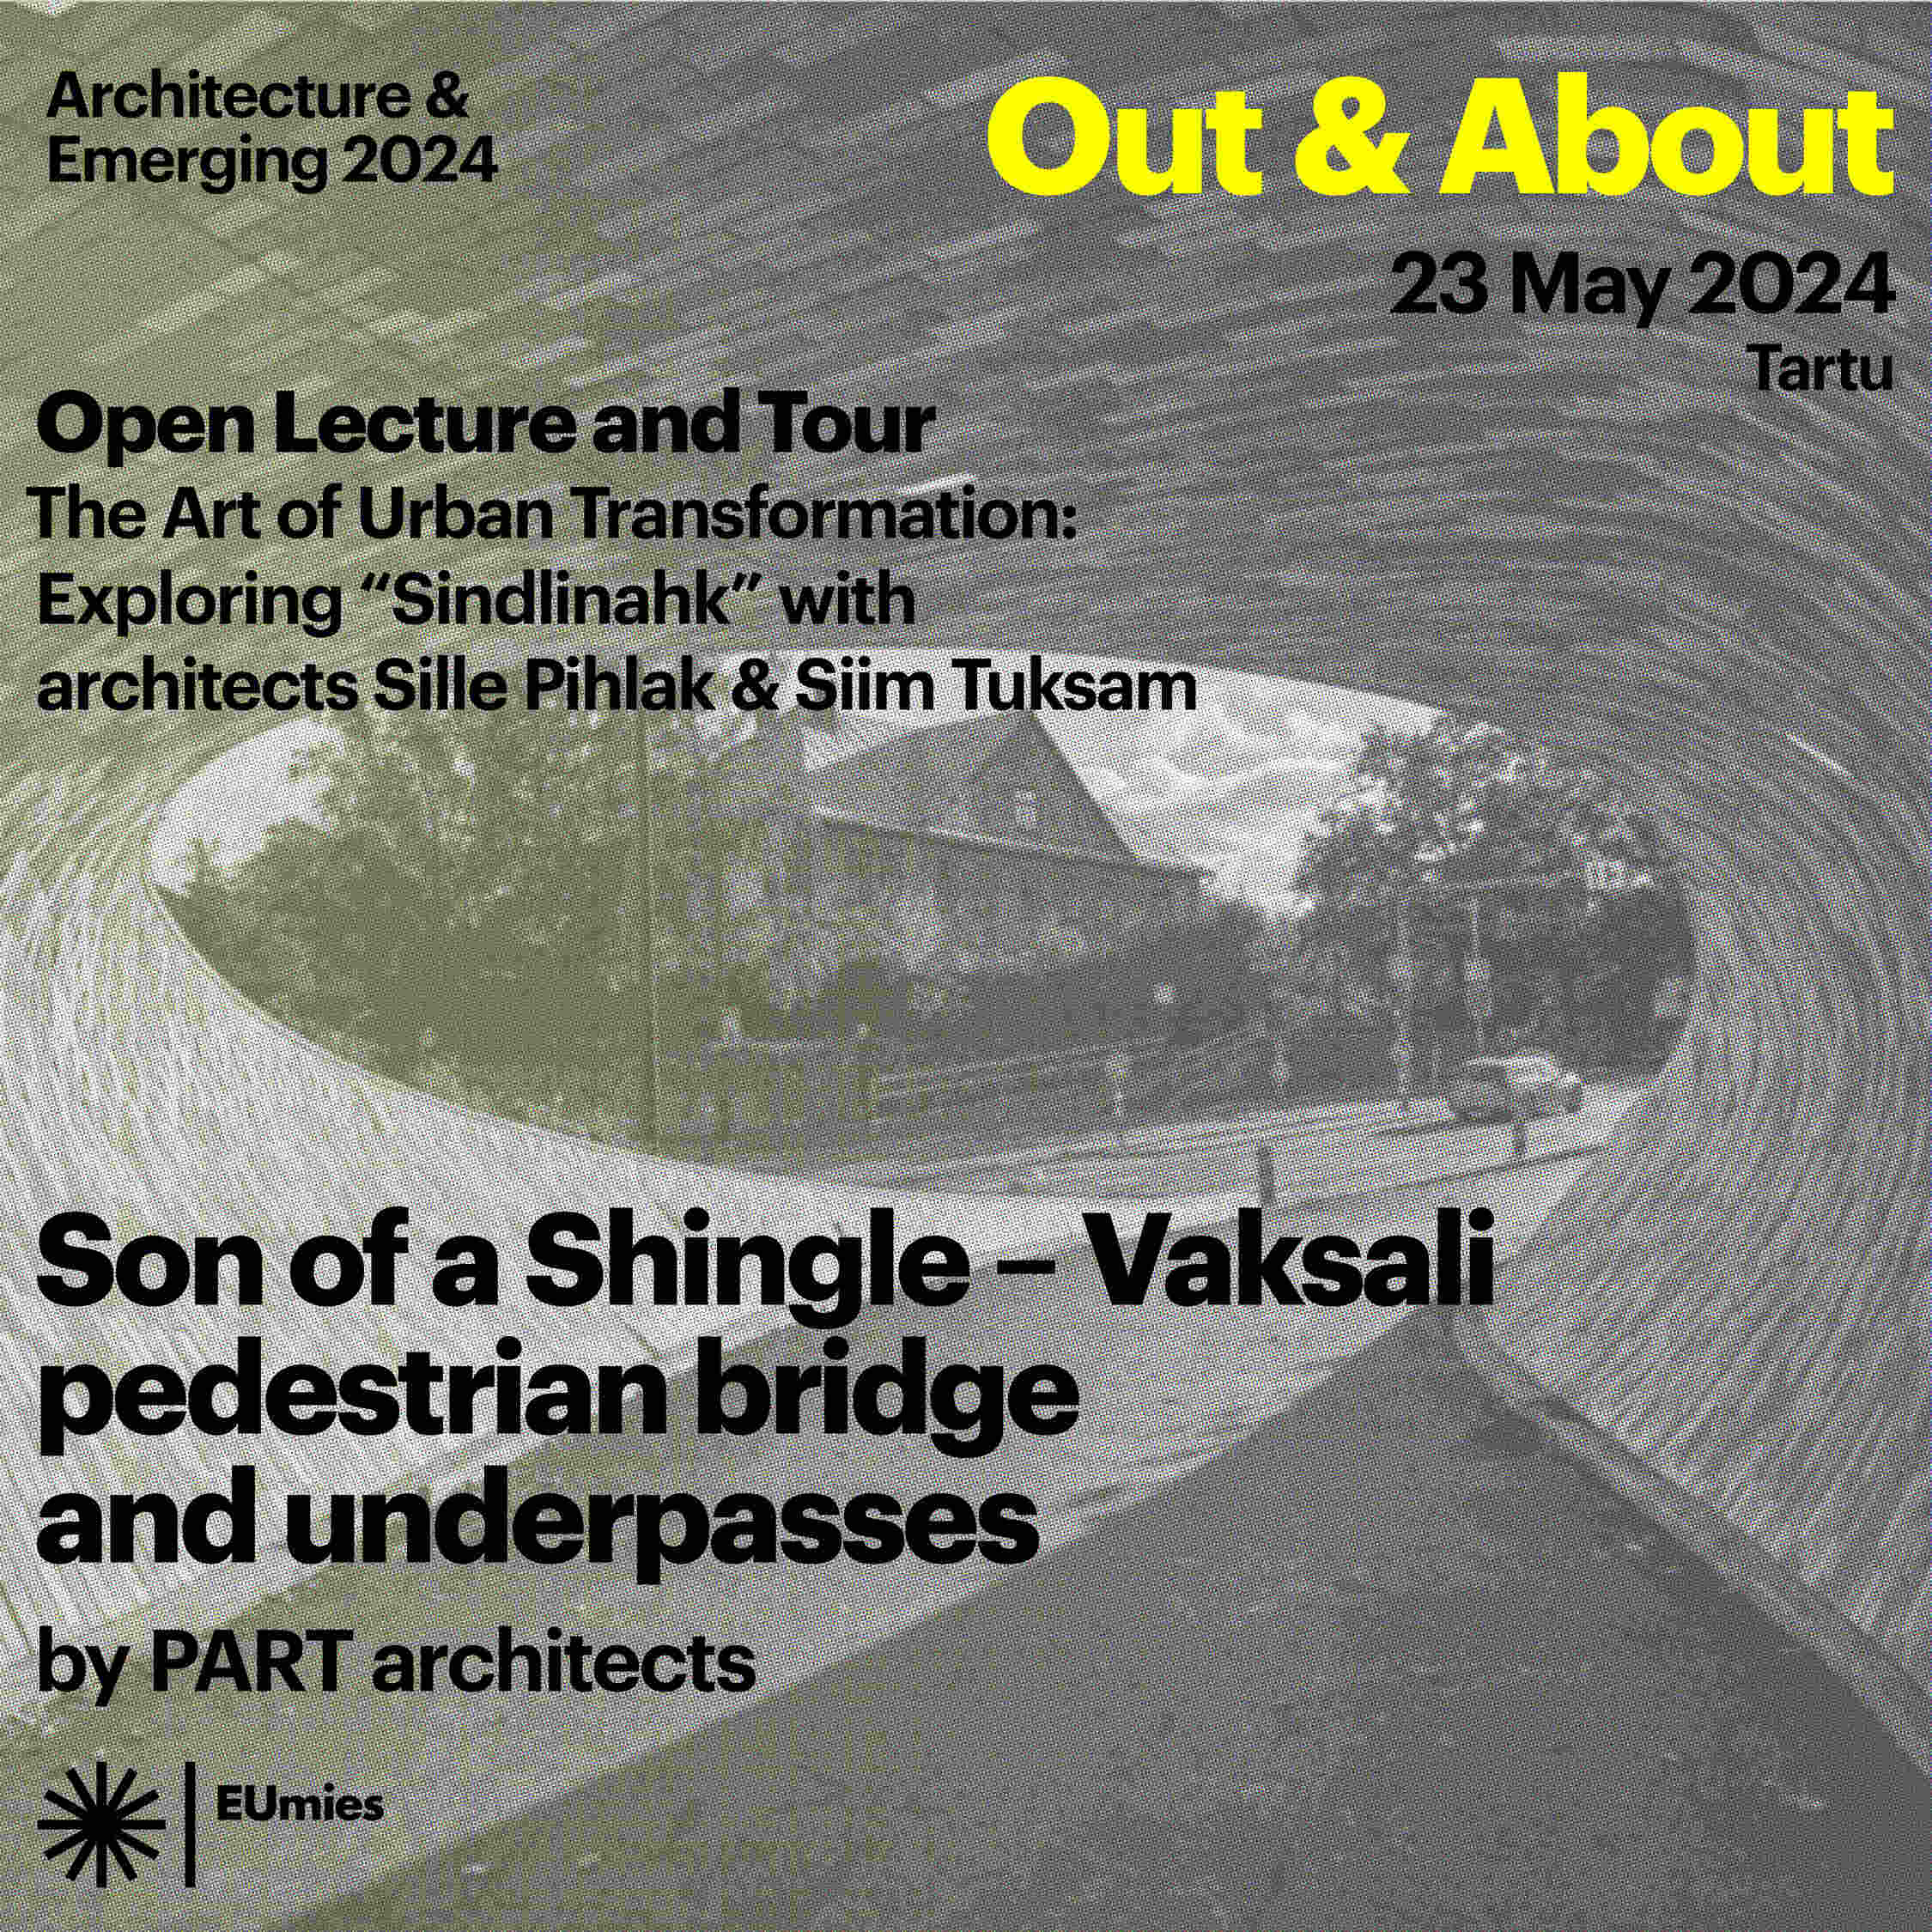 Out & About: Son of a Shingle – Vaksali pedestrian bridge and underpasses